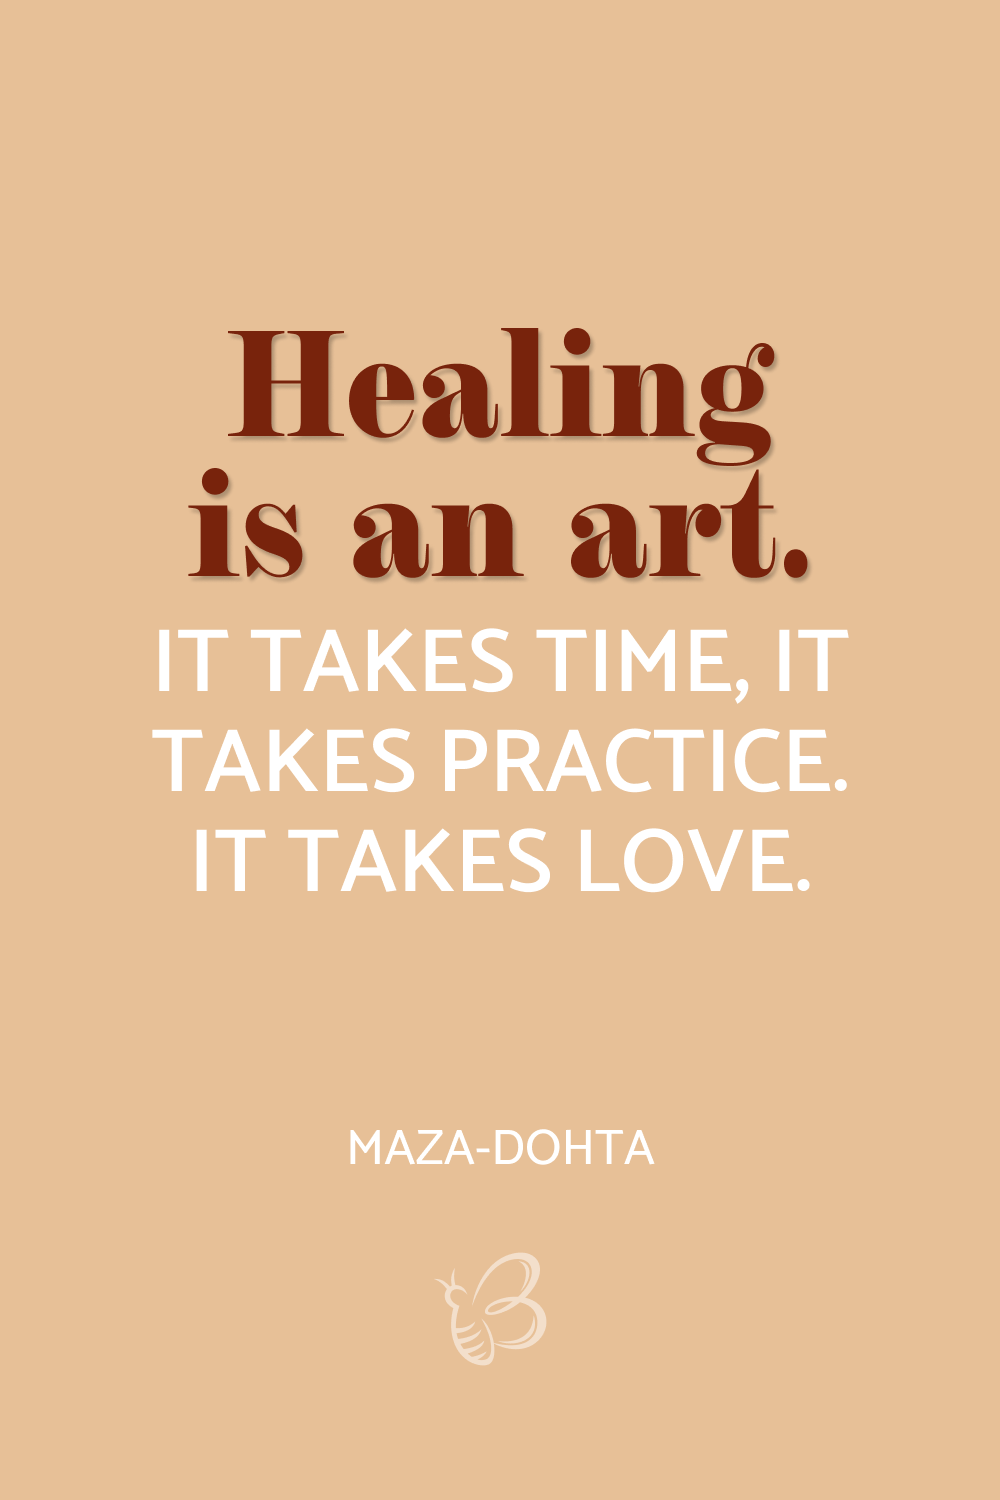 Healing is an art. It takes time, it takes practice. It takes love